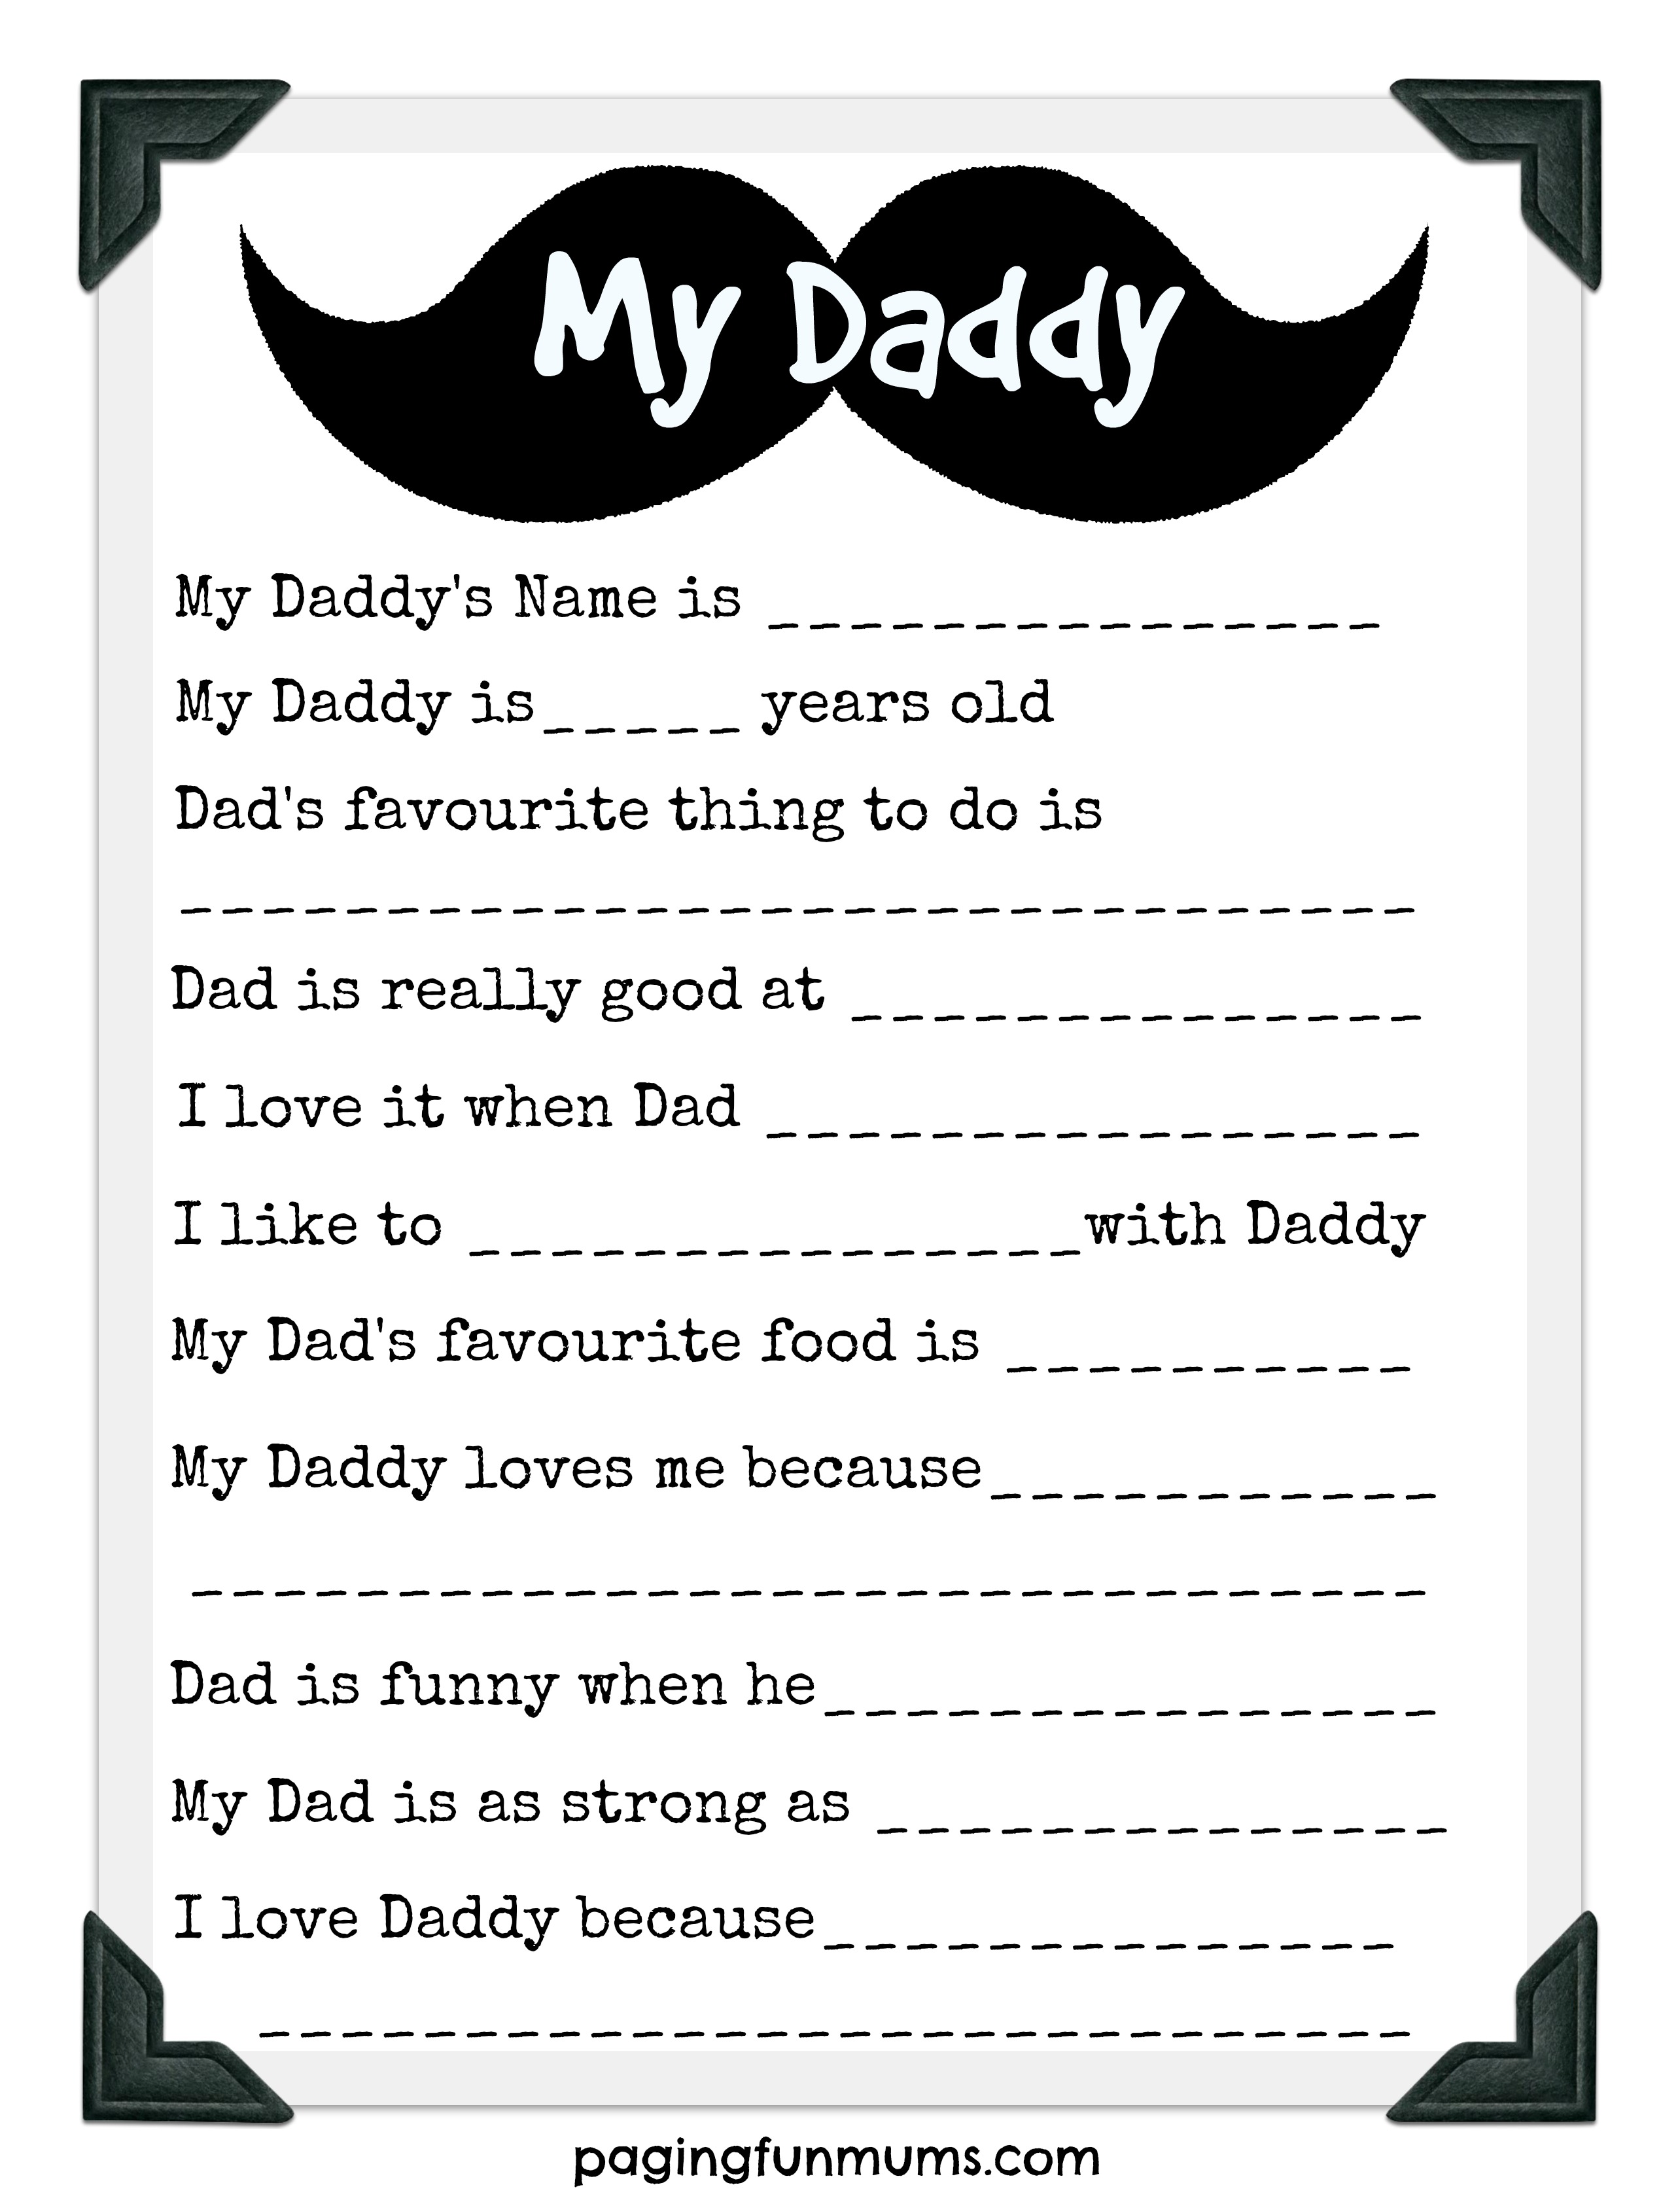 my-daddy-questionnaire-printable